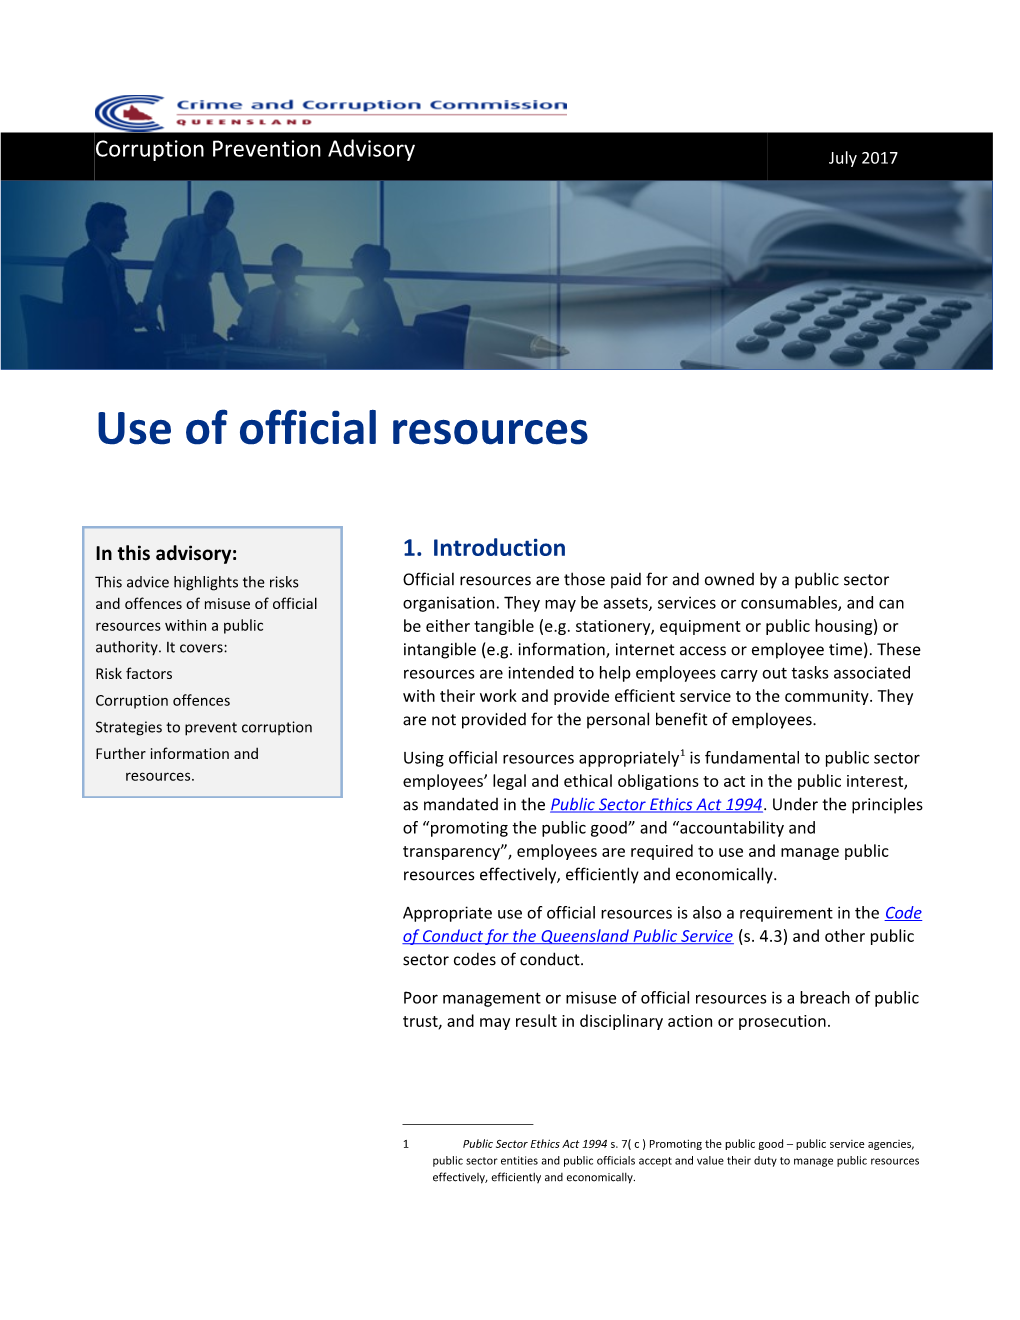 Use of Official Resources